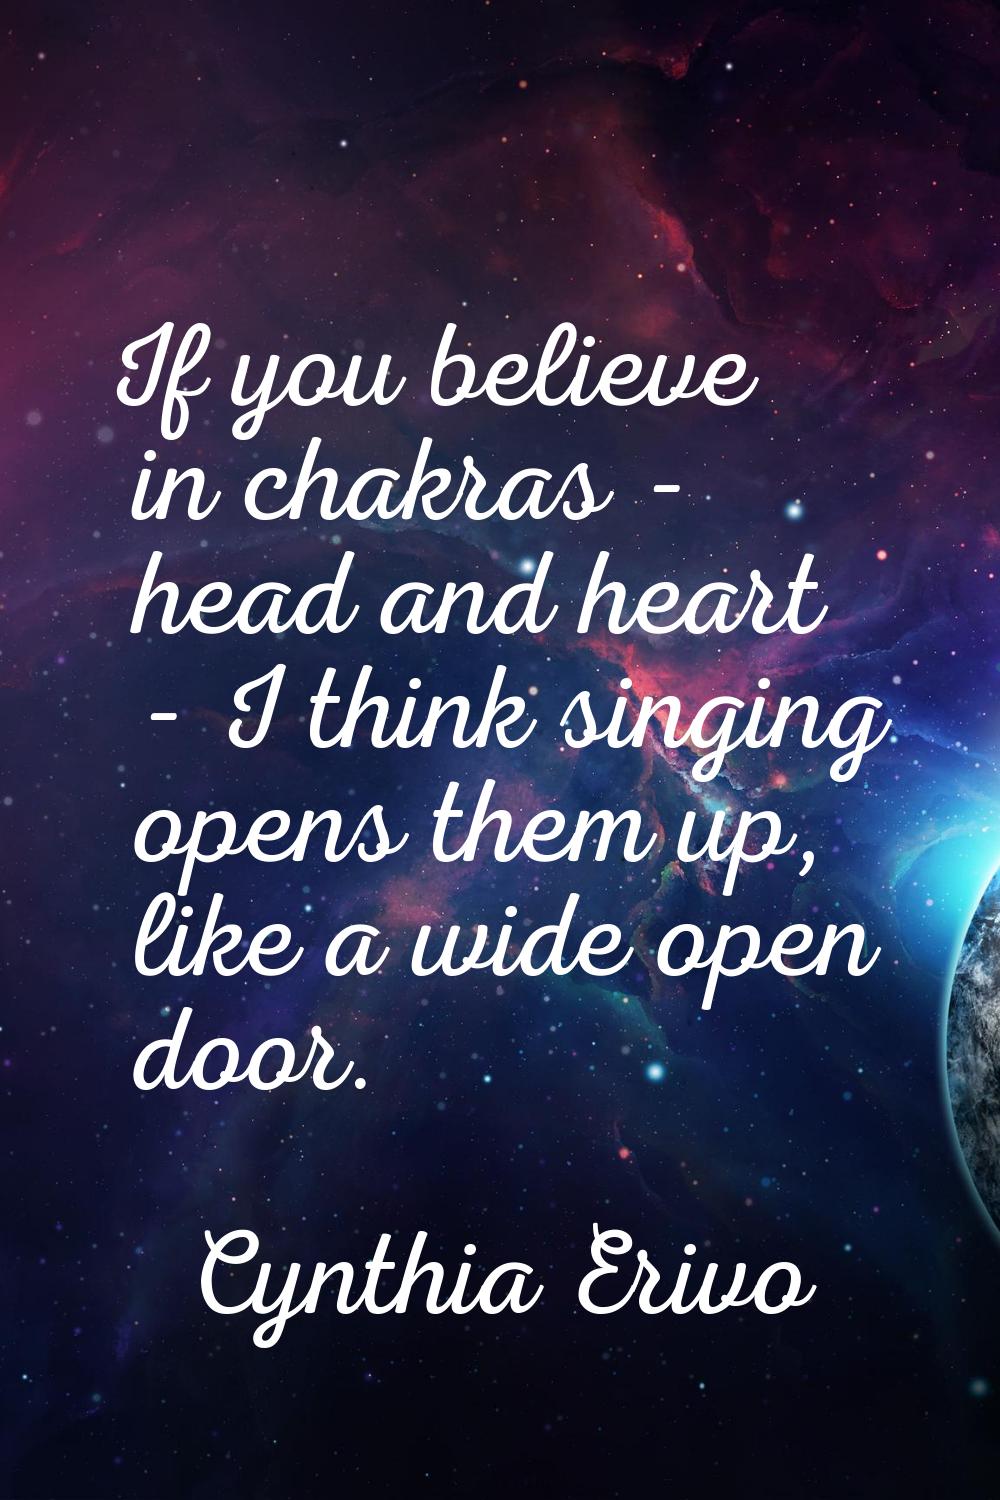 If you believe in chakras - head and heart - I think singing opens them up, like a wide open door.